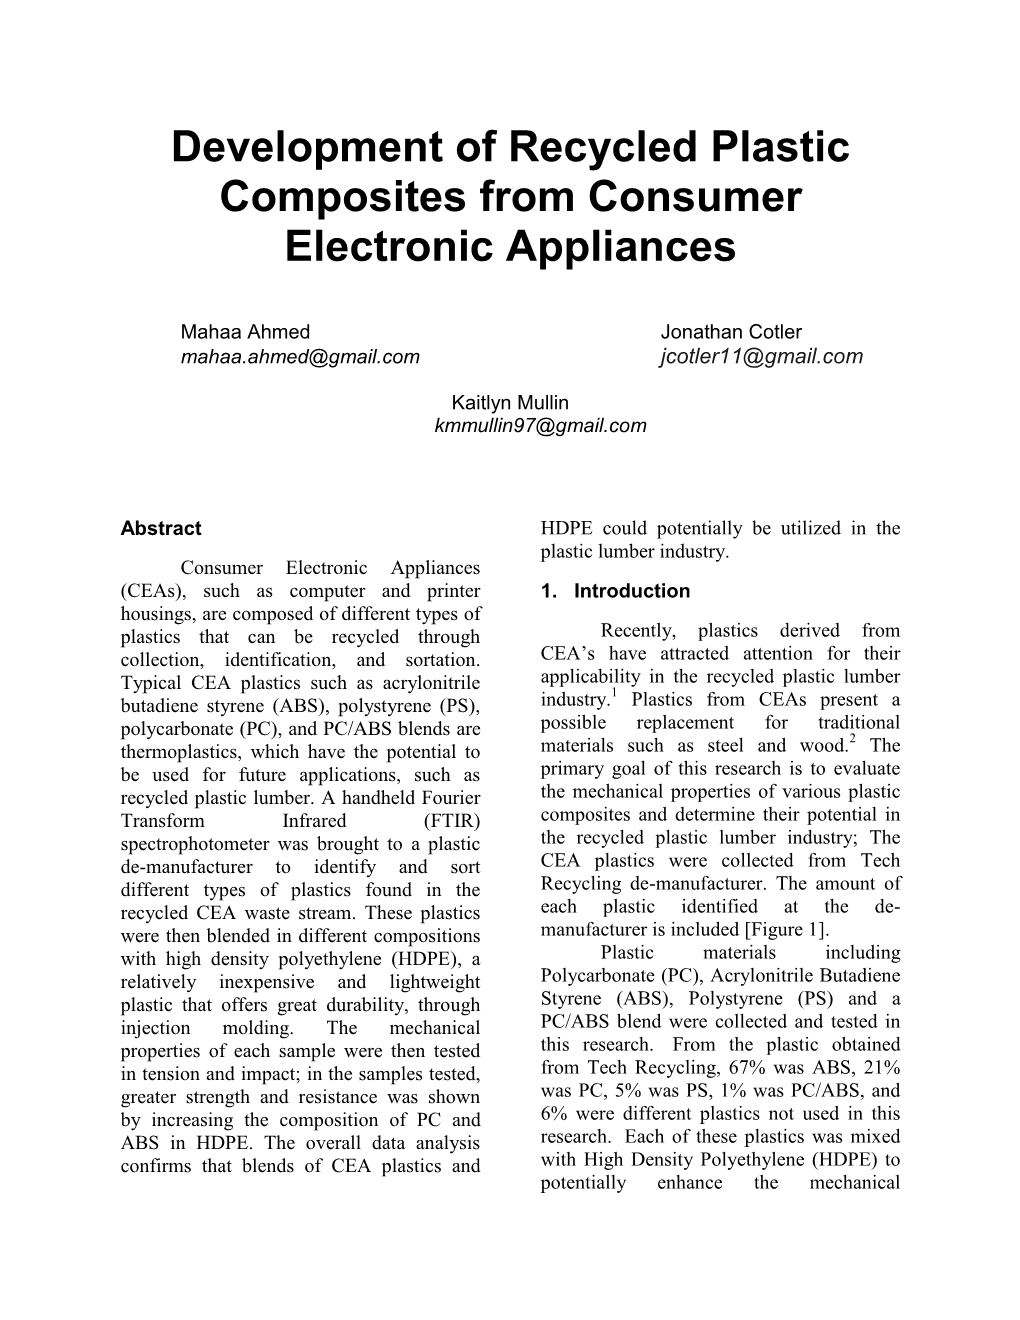 Development of Recycled Plastic Composites from Consumer Electronic Appliances